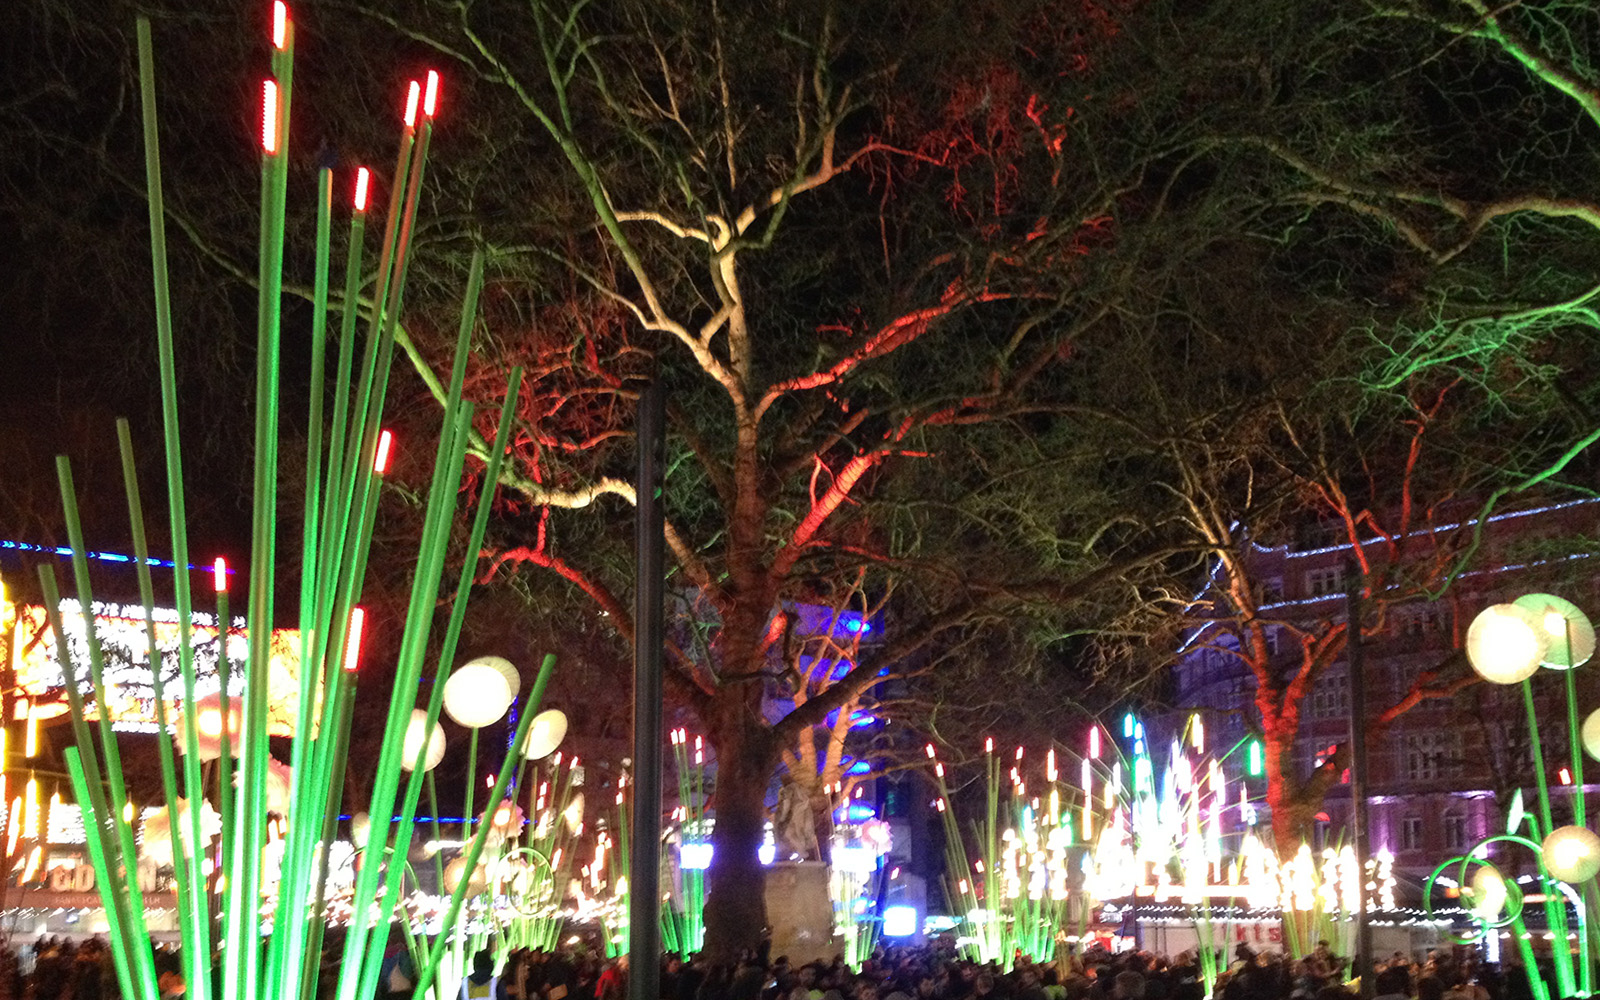 Leicester Square, Lumiere, 17 January 2016